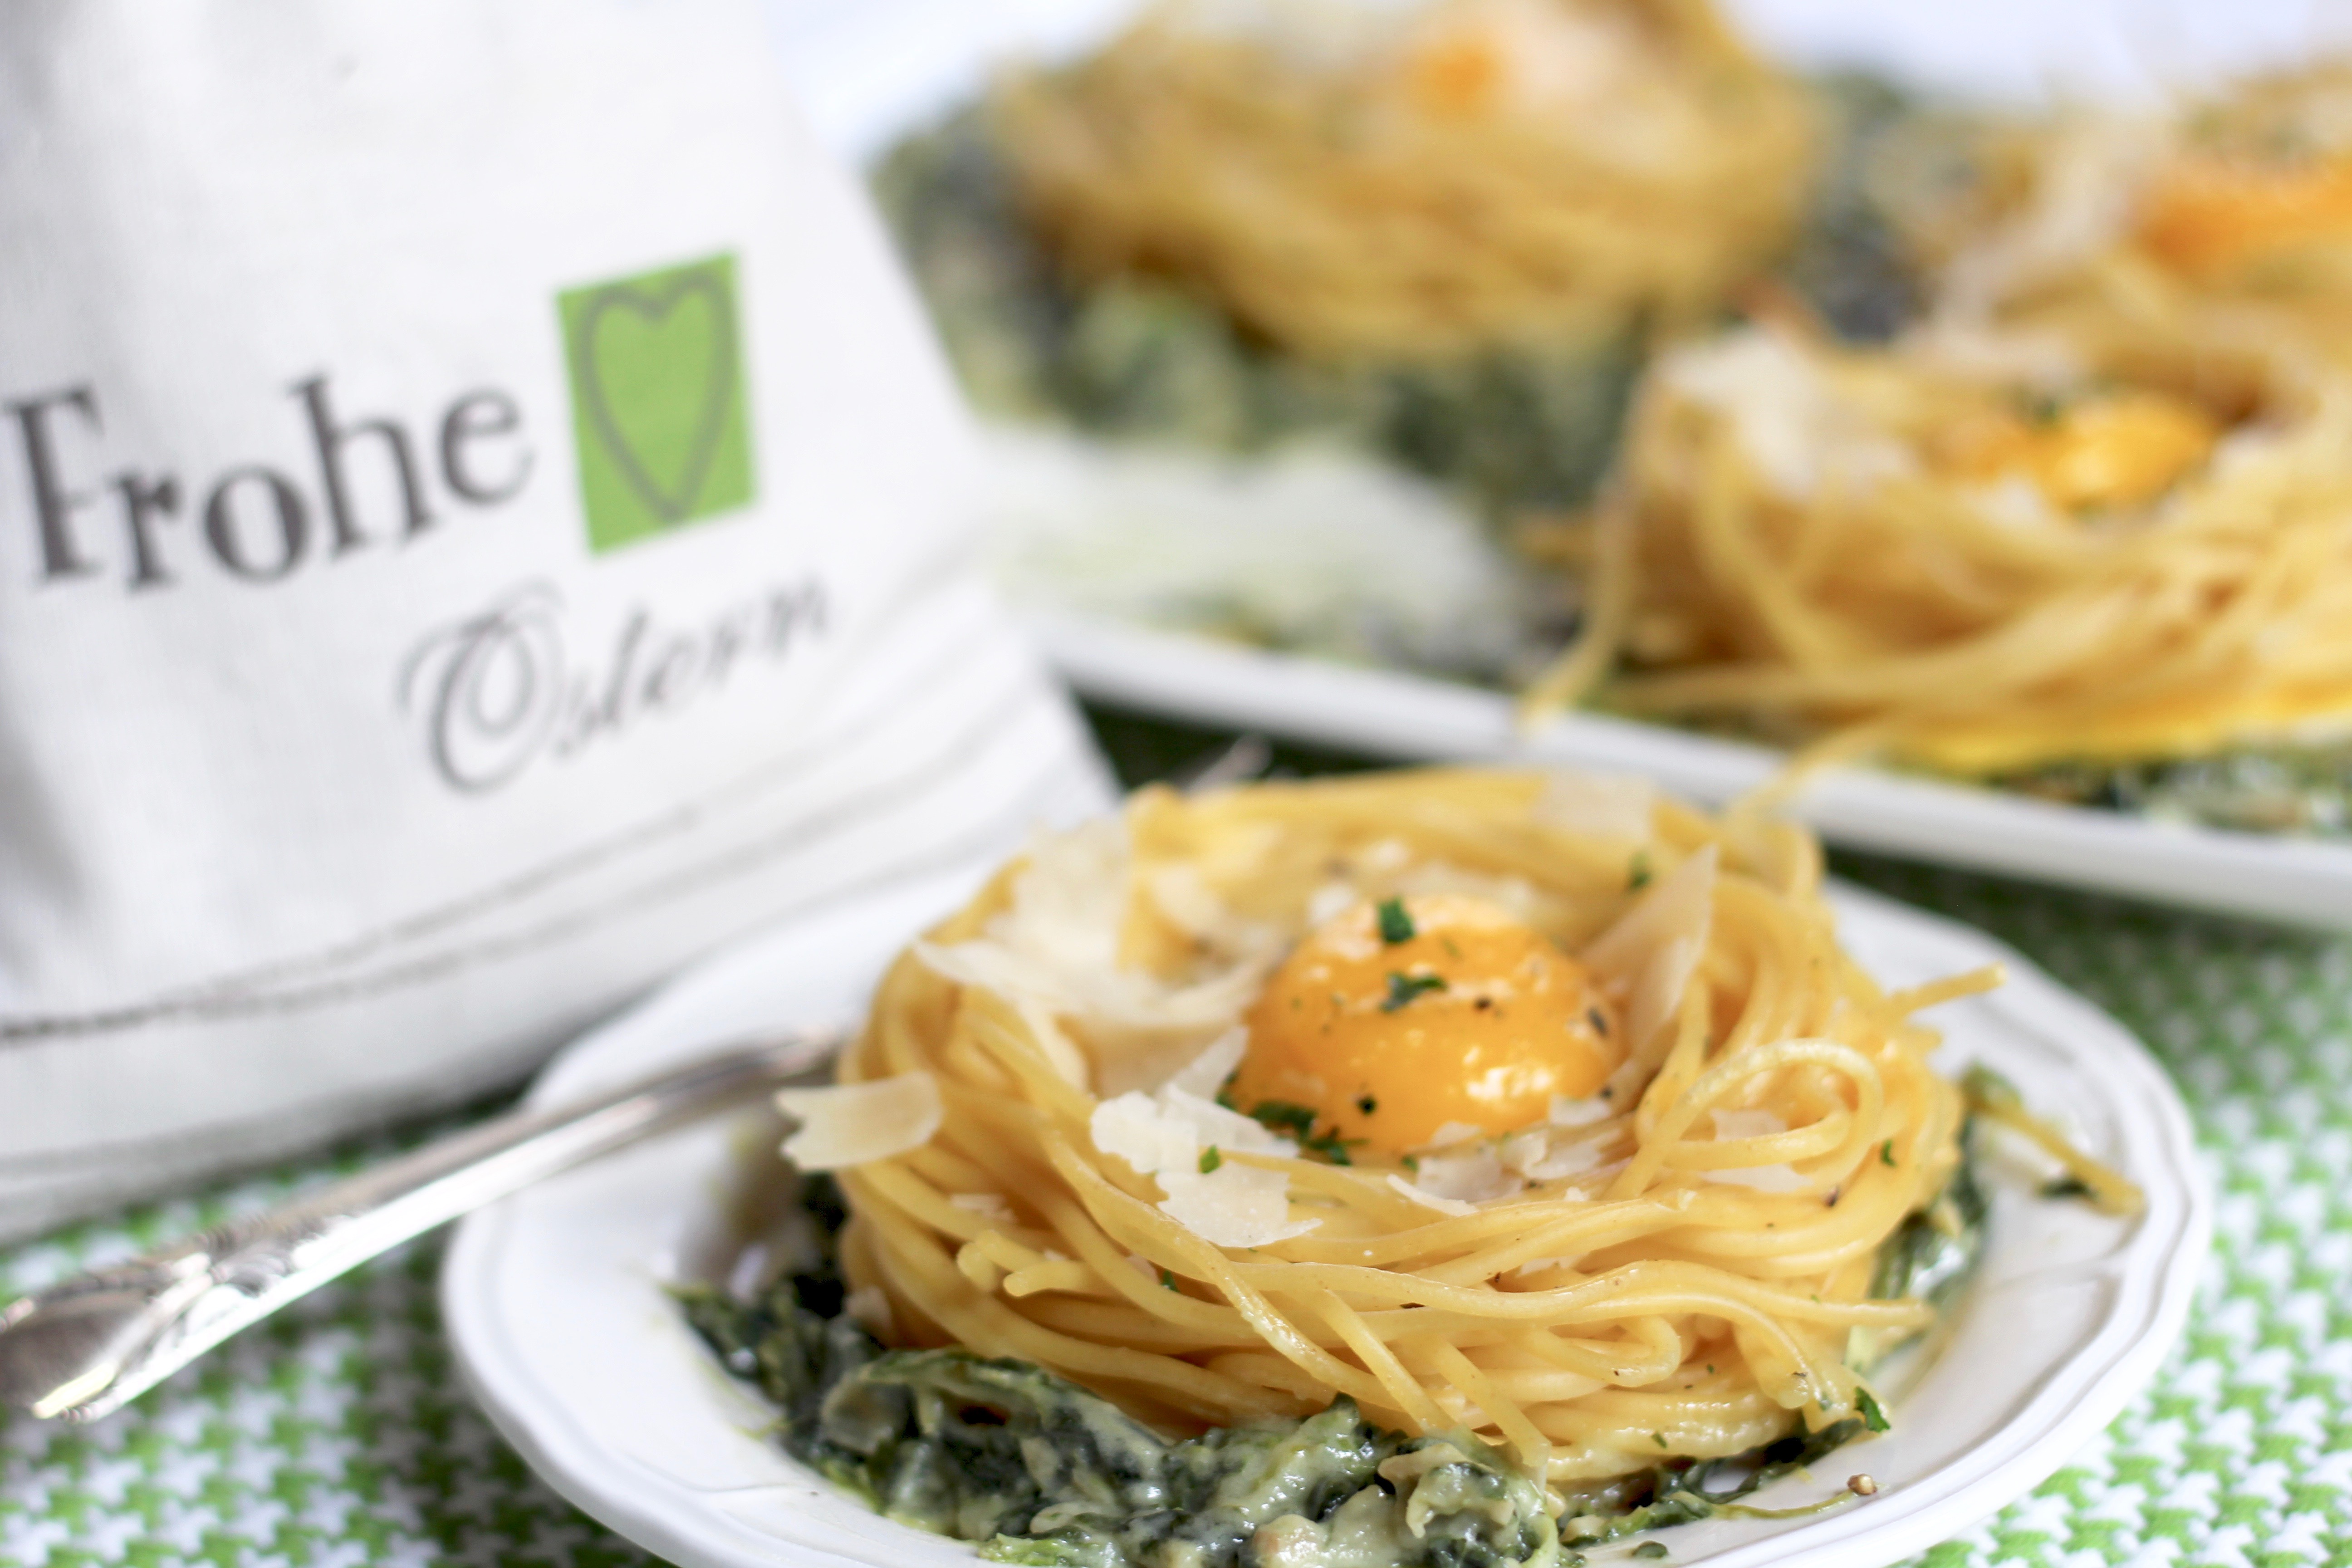 https://diaryofamadhausfrau.com/wp-content/uploads/2019/04/Fried-Egg-Spaghetti-Nests-Over-Creamed-Spinach-6.jpeg